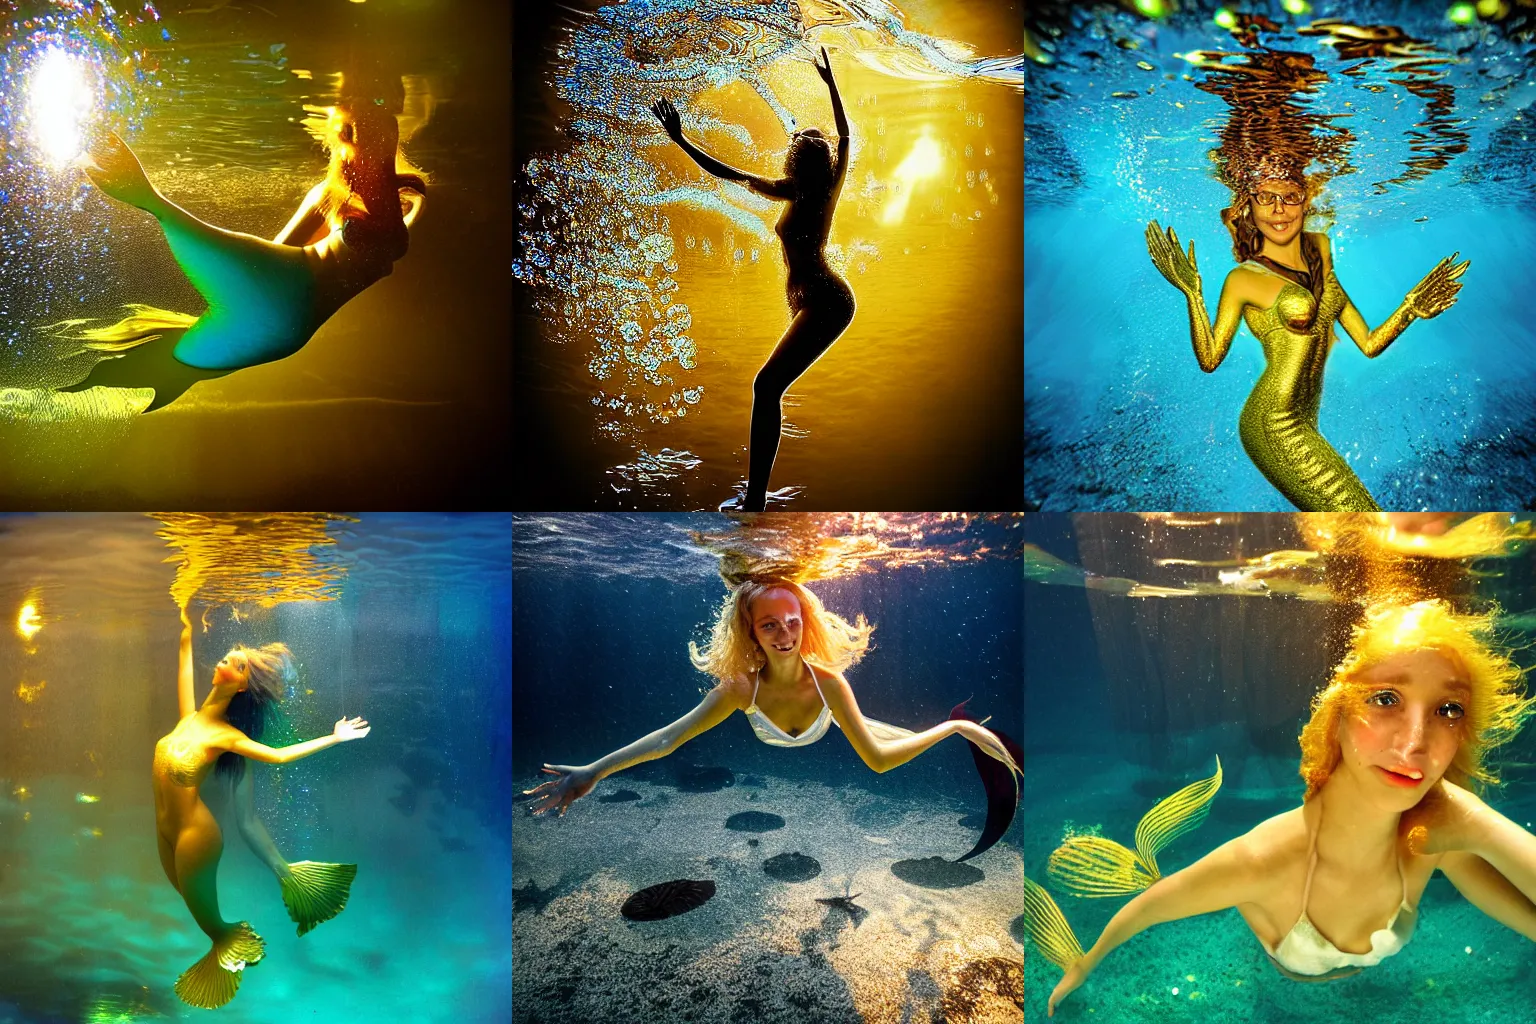 Prompt: golden coated mermaid underwater art photograph bubbles and light refractions